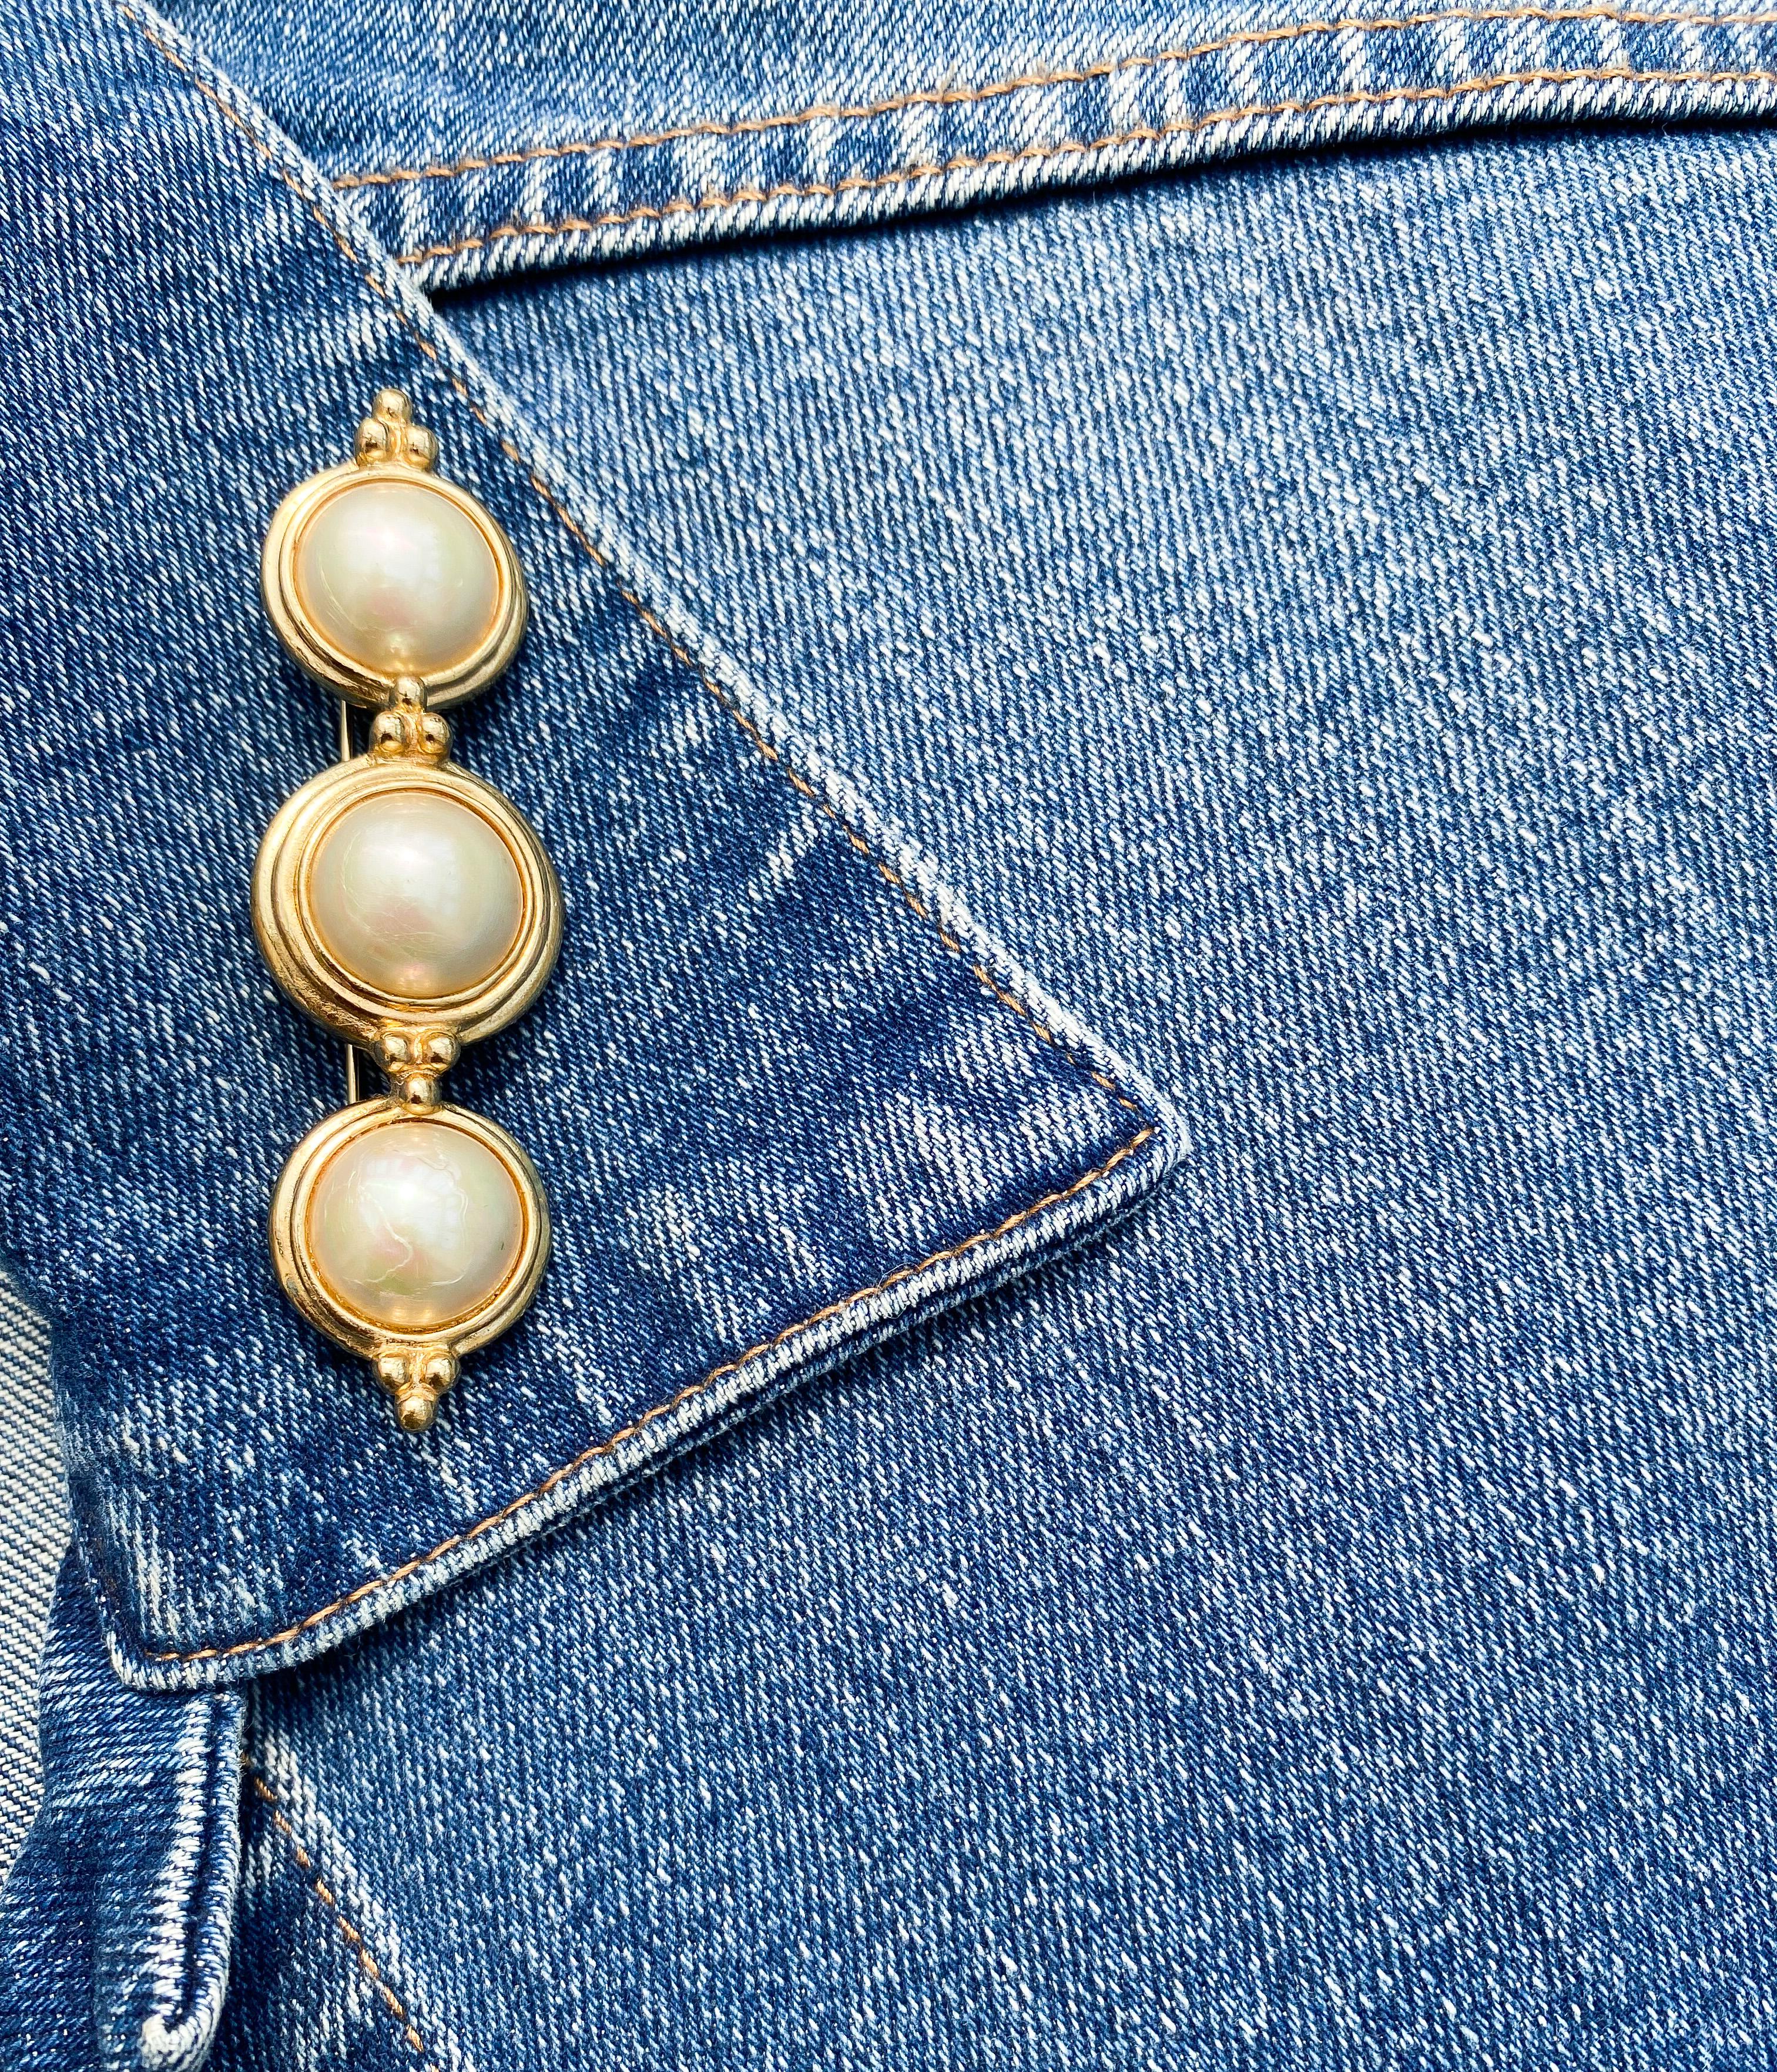 A paste pearl and gilt metal bar brooch and matching earrings, C. Dior, 1980s. For Sale 3